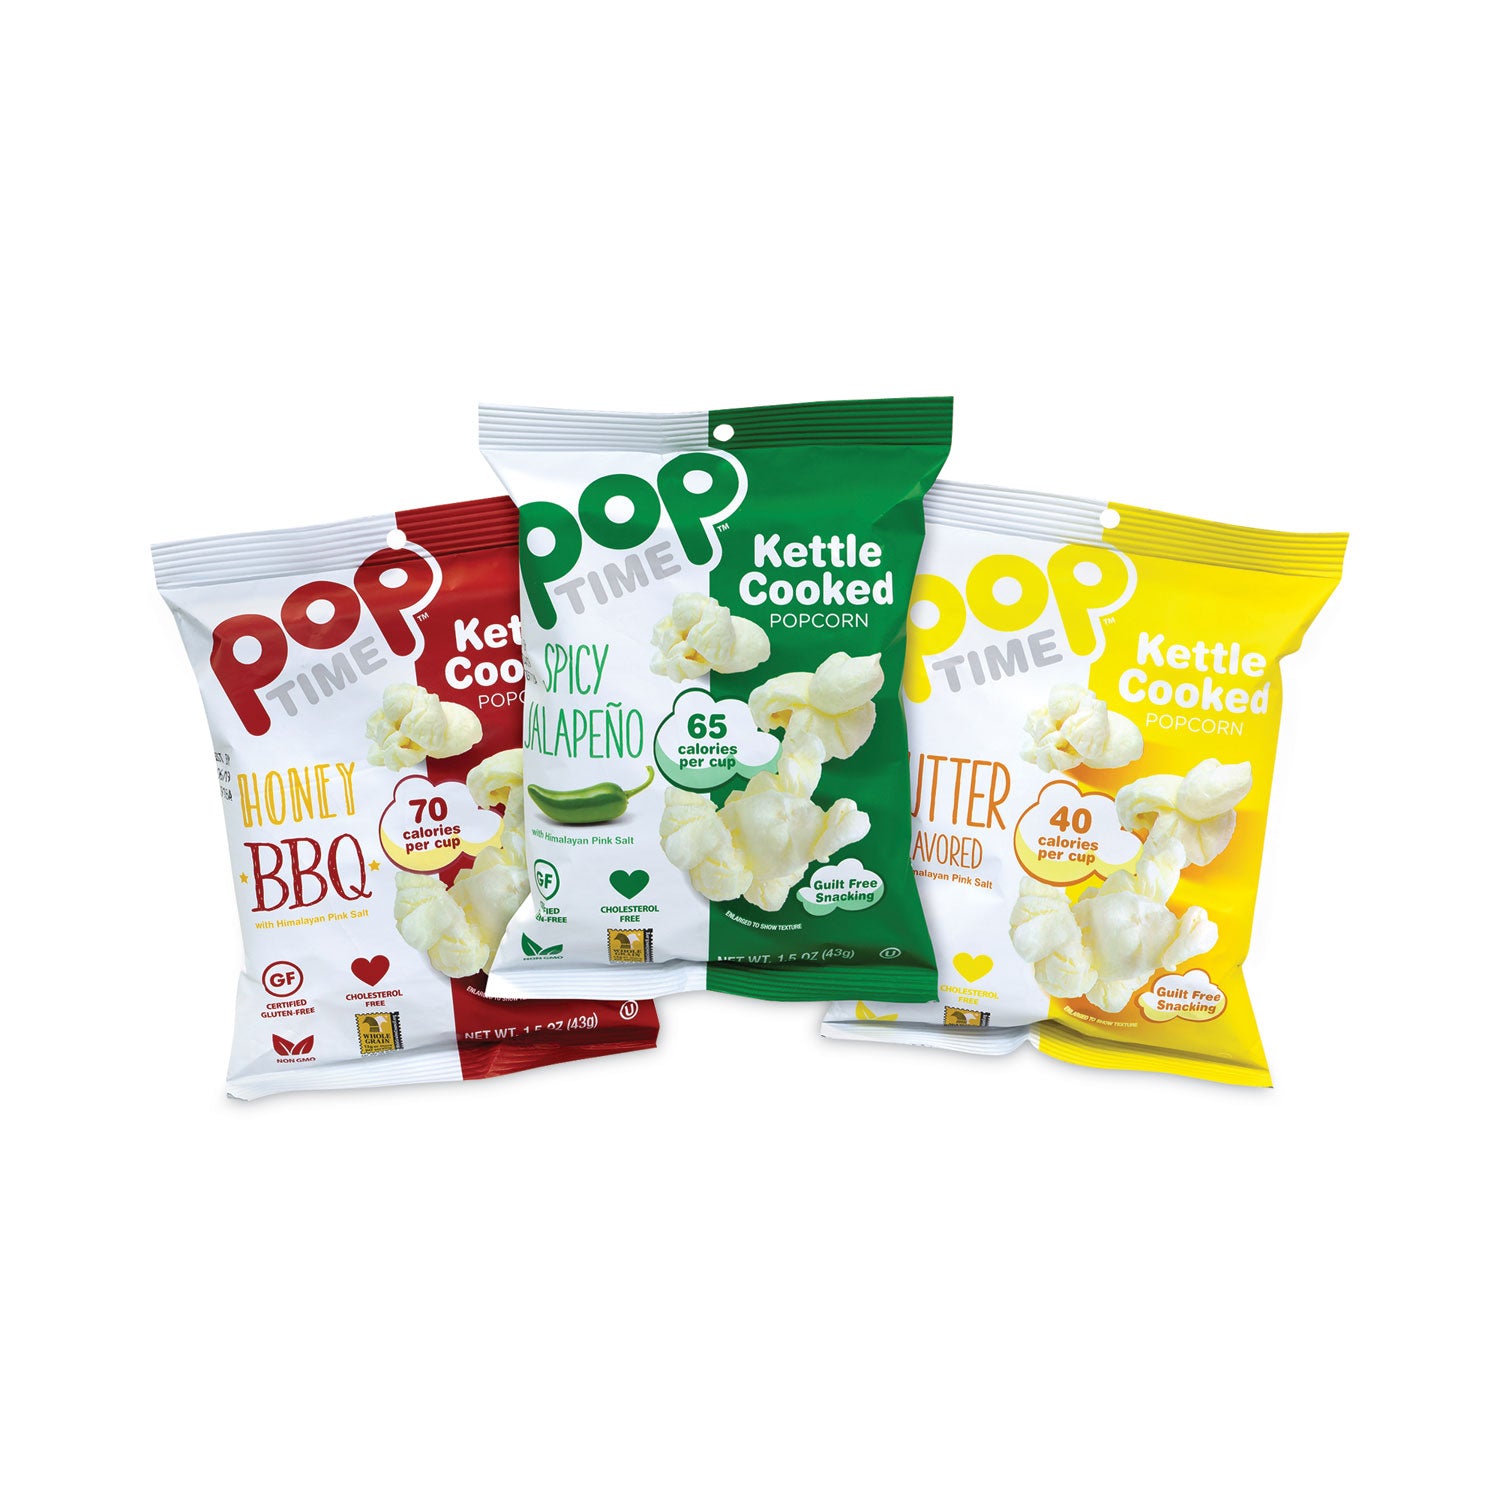 kettle-cooked-popcorn-variety-pack-assorted-flavors-1-oz-bag-24-carton-ships-in-1-3-business-days_grr20902646 - 2